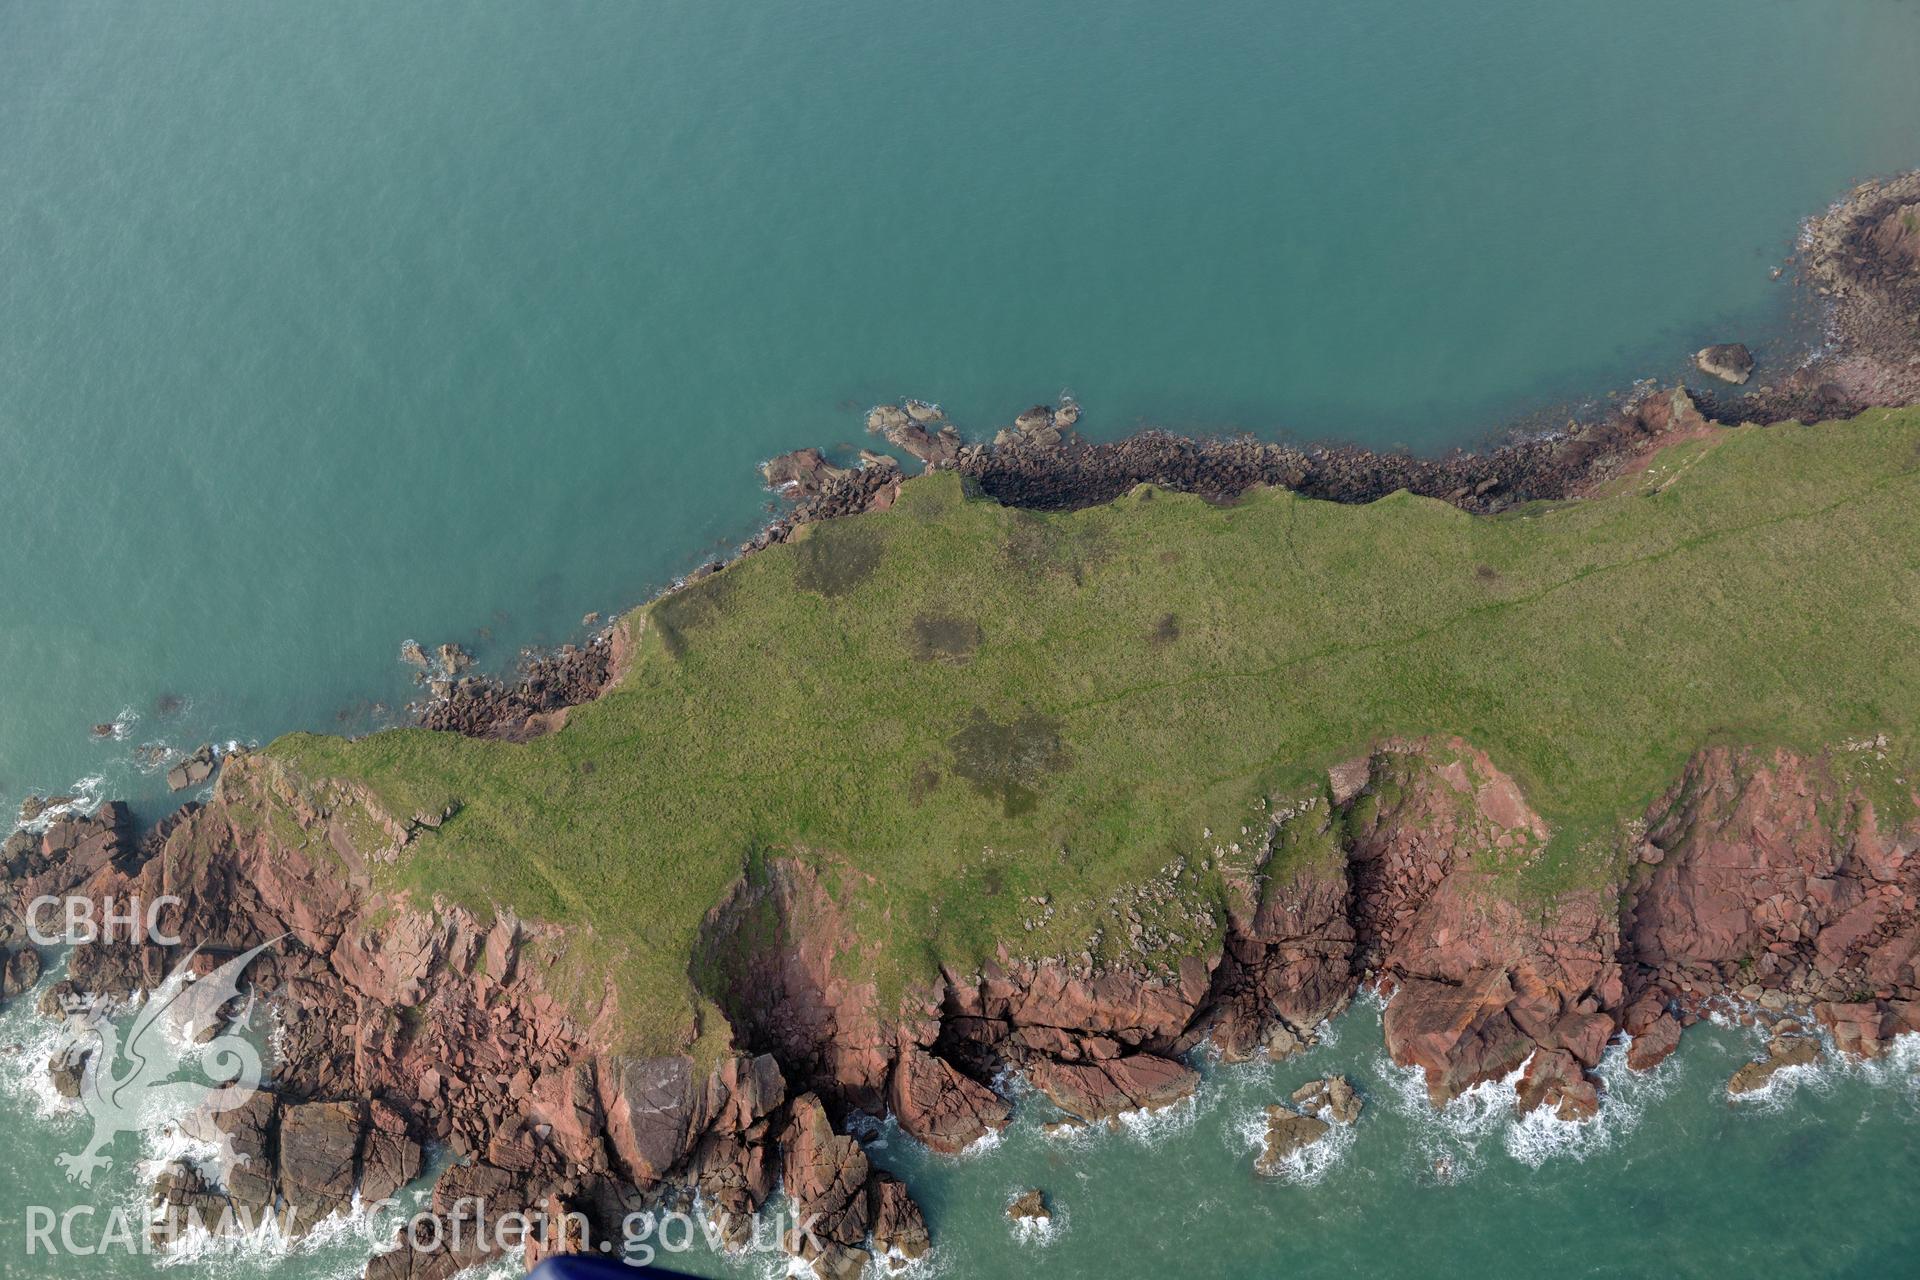 Aerial photography of Gateholm taken on 27th March 2017. Baseline aerial reconnaissance survey for the CHERISH Project. ? Crown: CHERISH PROJECT 2019. Produced with EU funds through the Ireland Wales Co-operation Programme 2014-2020. All material made freely available through the Open Government Licence.